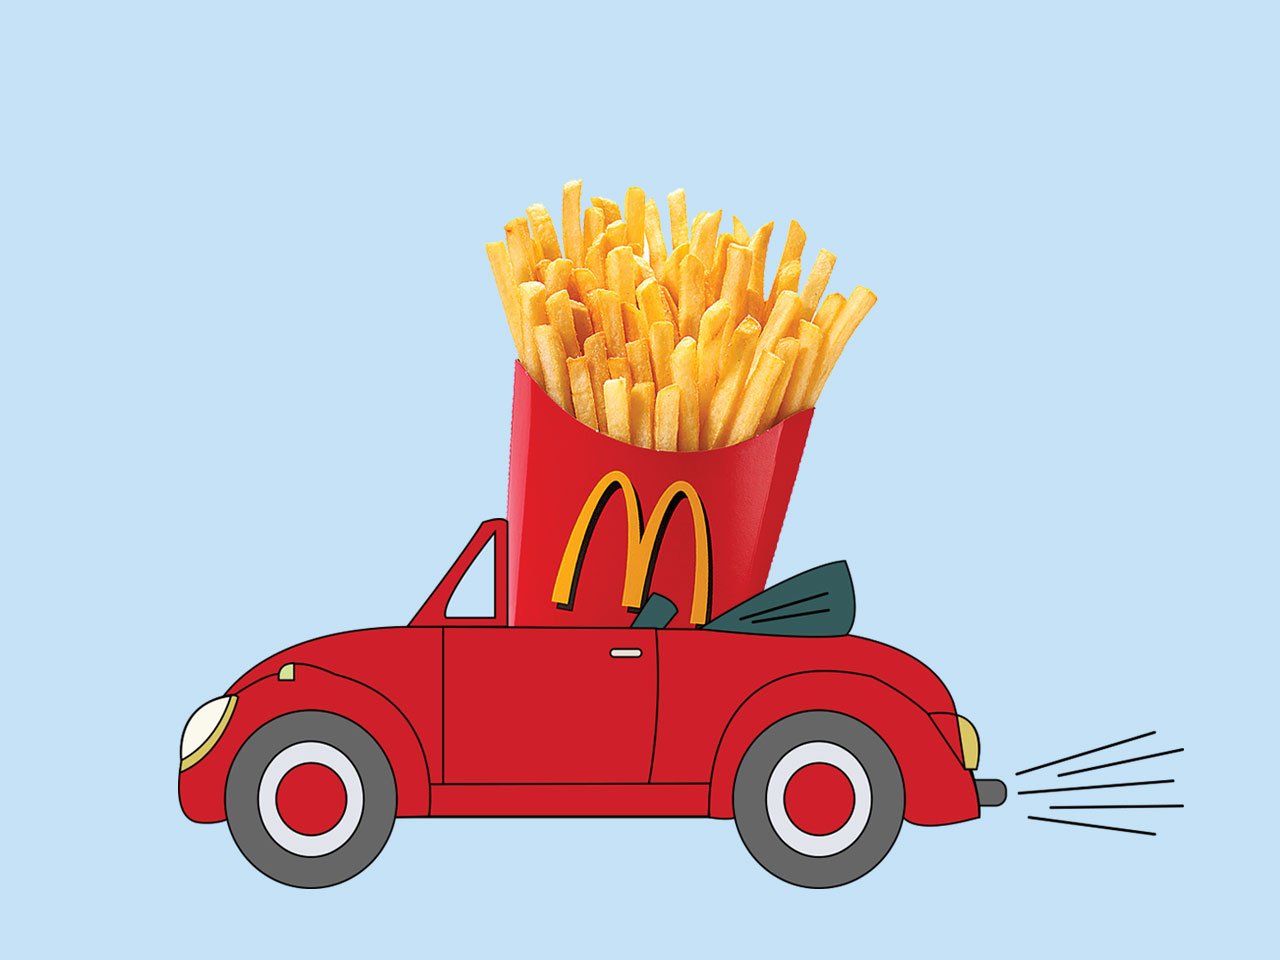 McDonald's delivery: Car driving around with a pack of french fries inside